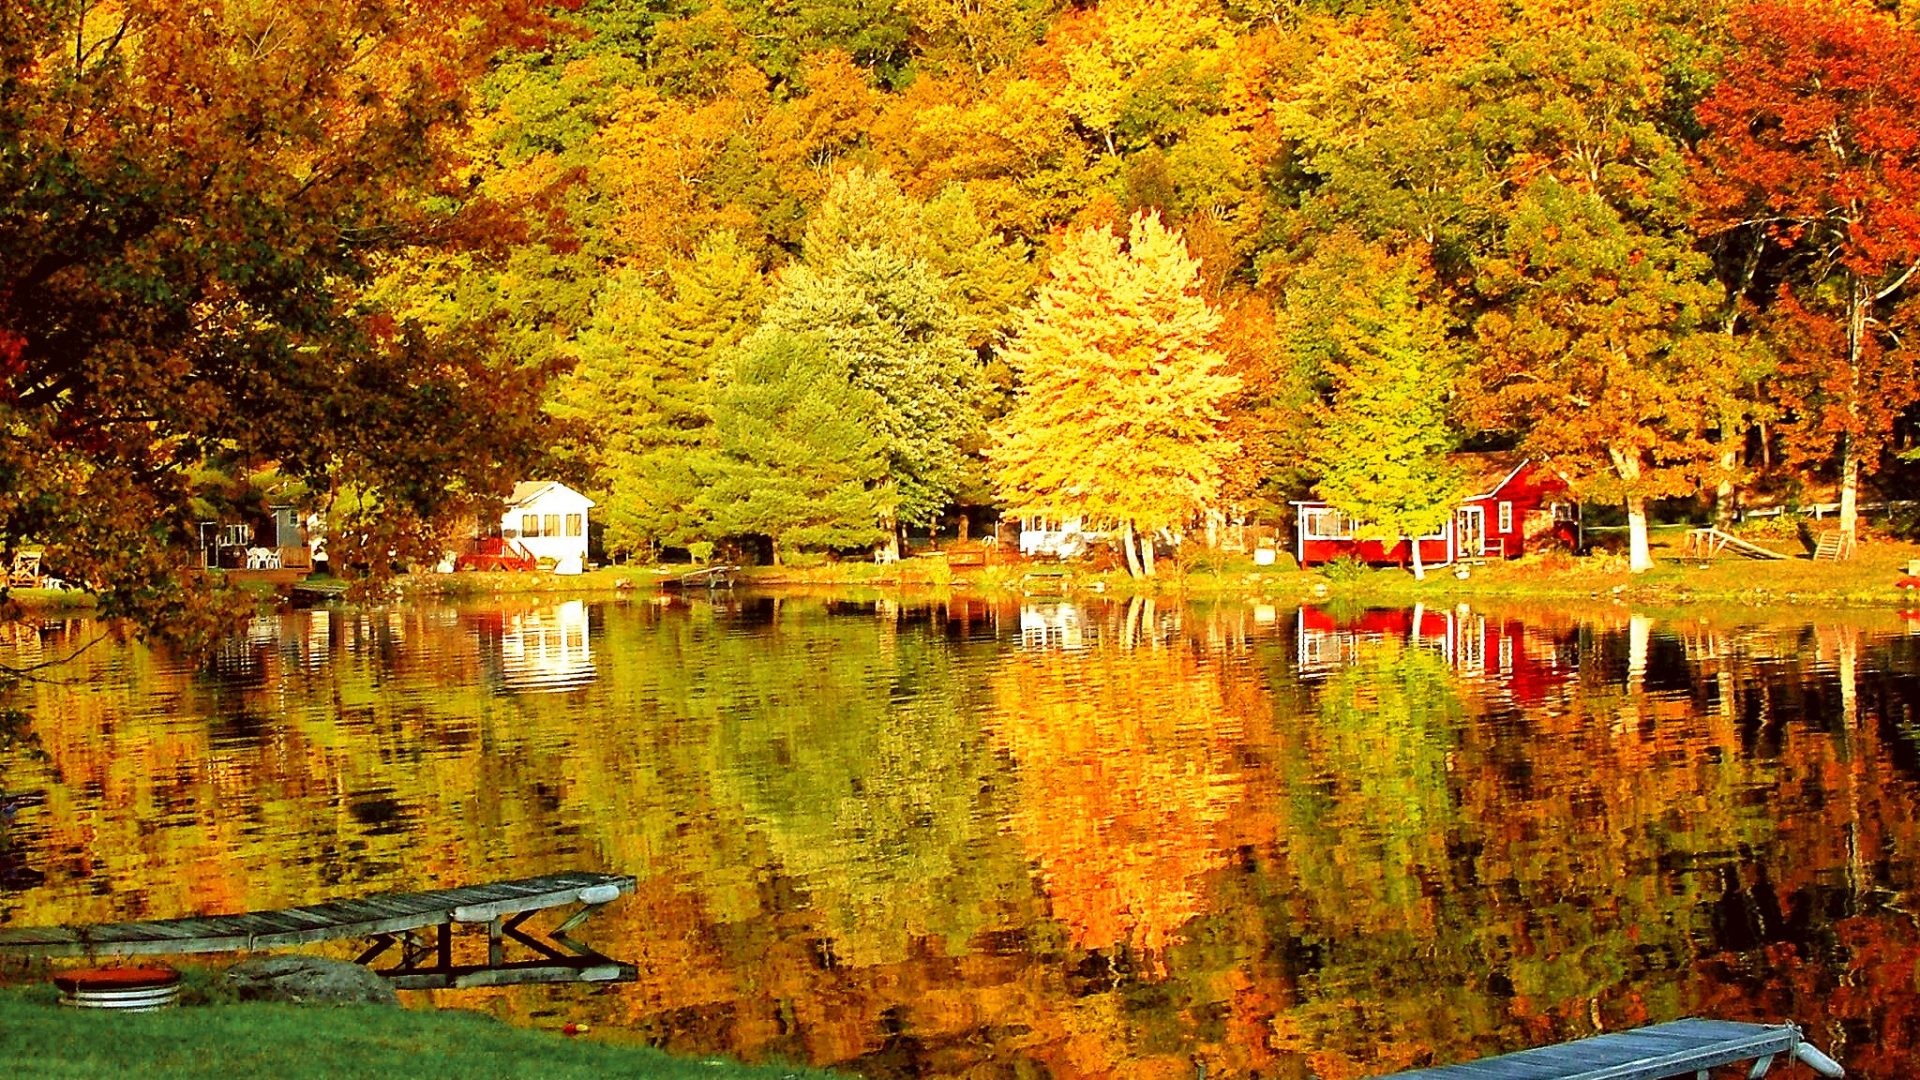 1920x1080 Fall Tag - Colors Lakeshore Shine Beautiful Fall Vermont Shore River Nice  Sunny Riverbank Trees Lovely